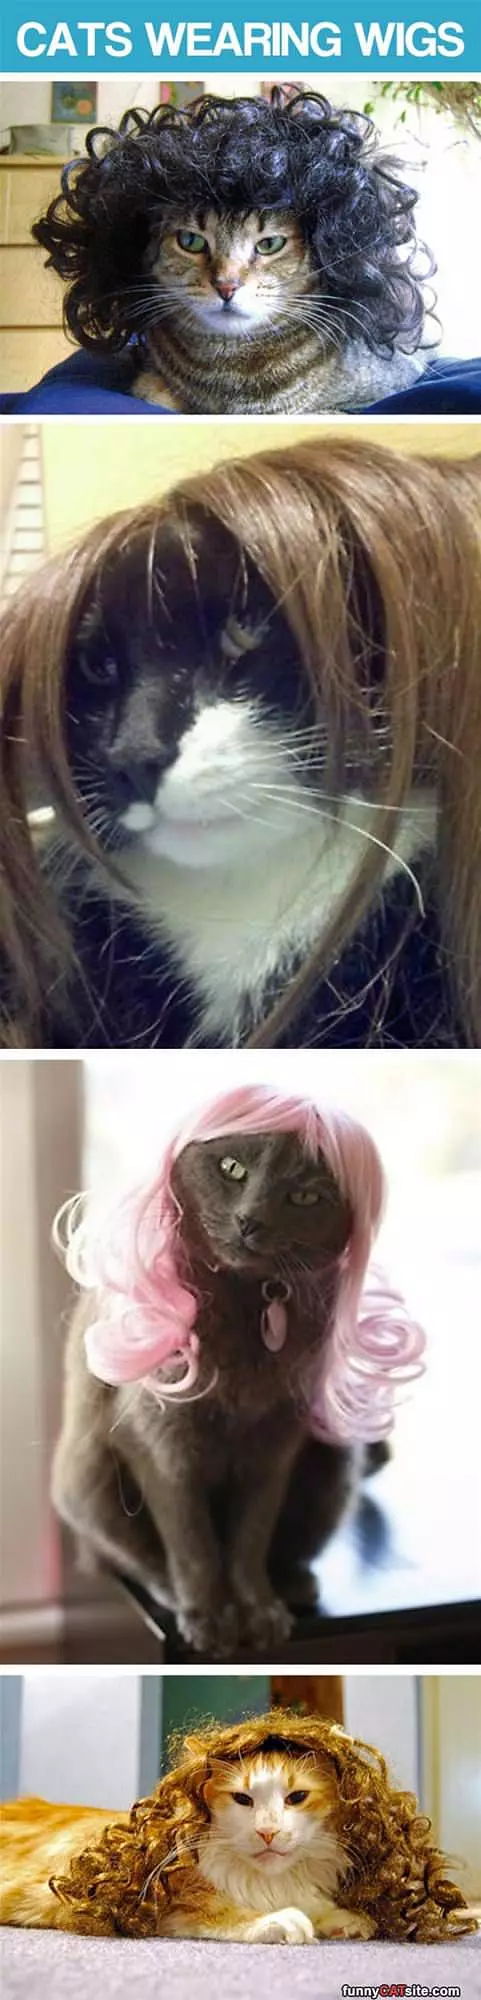 Cats In Wigs